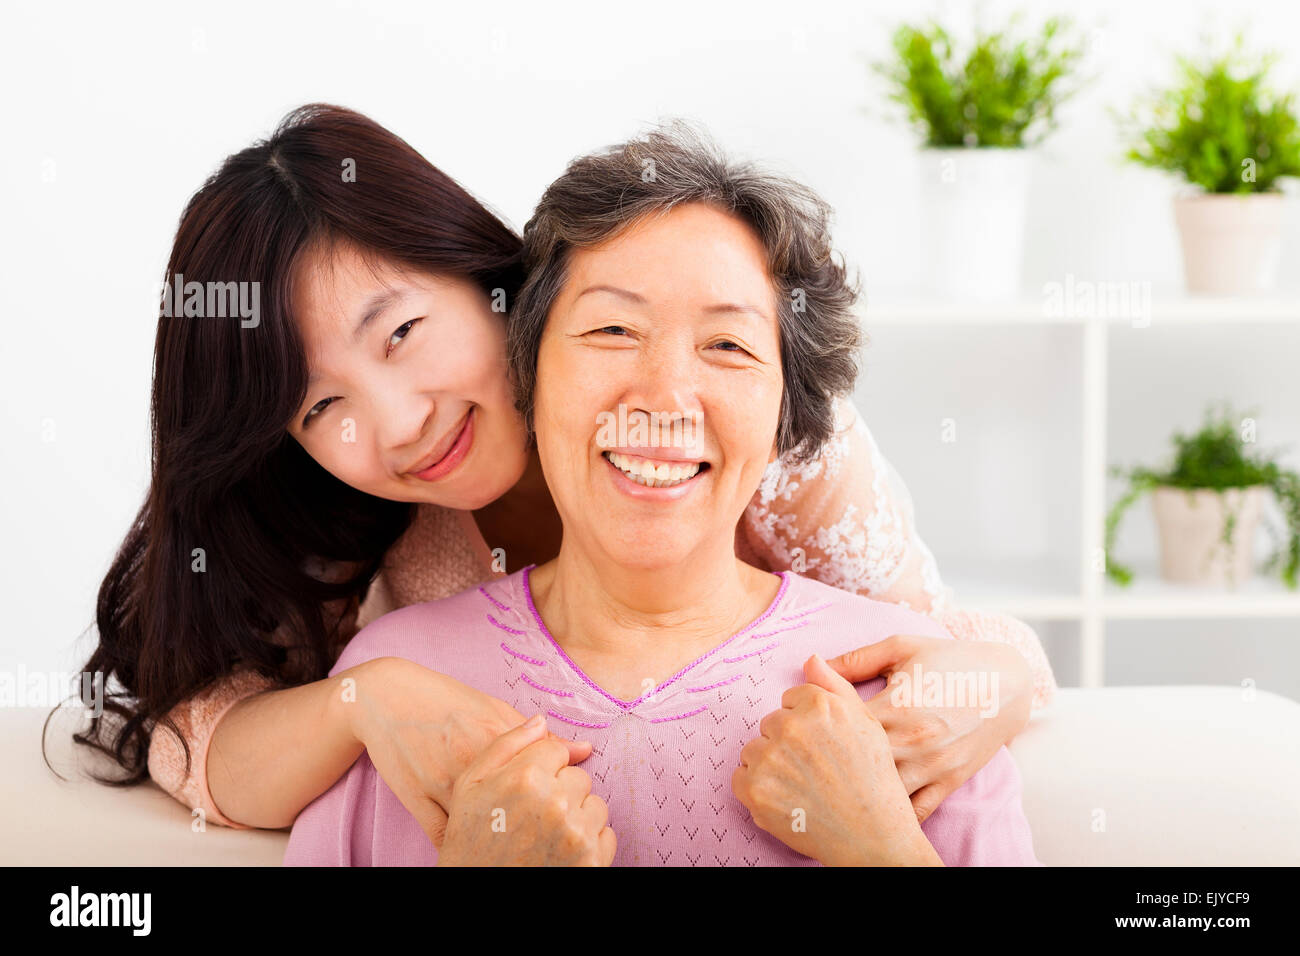 happy mother and her daughter Stock Photo